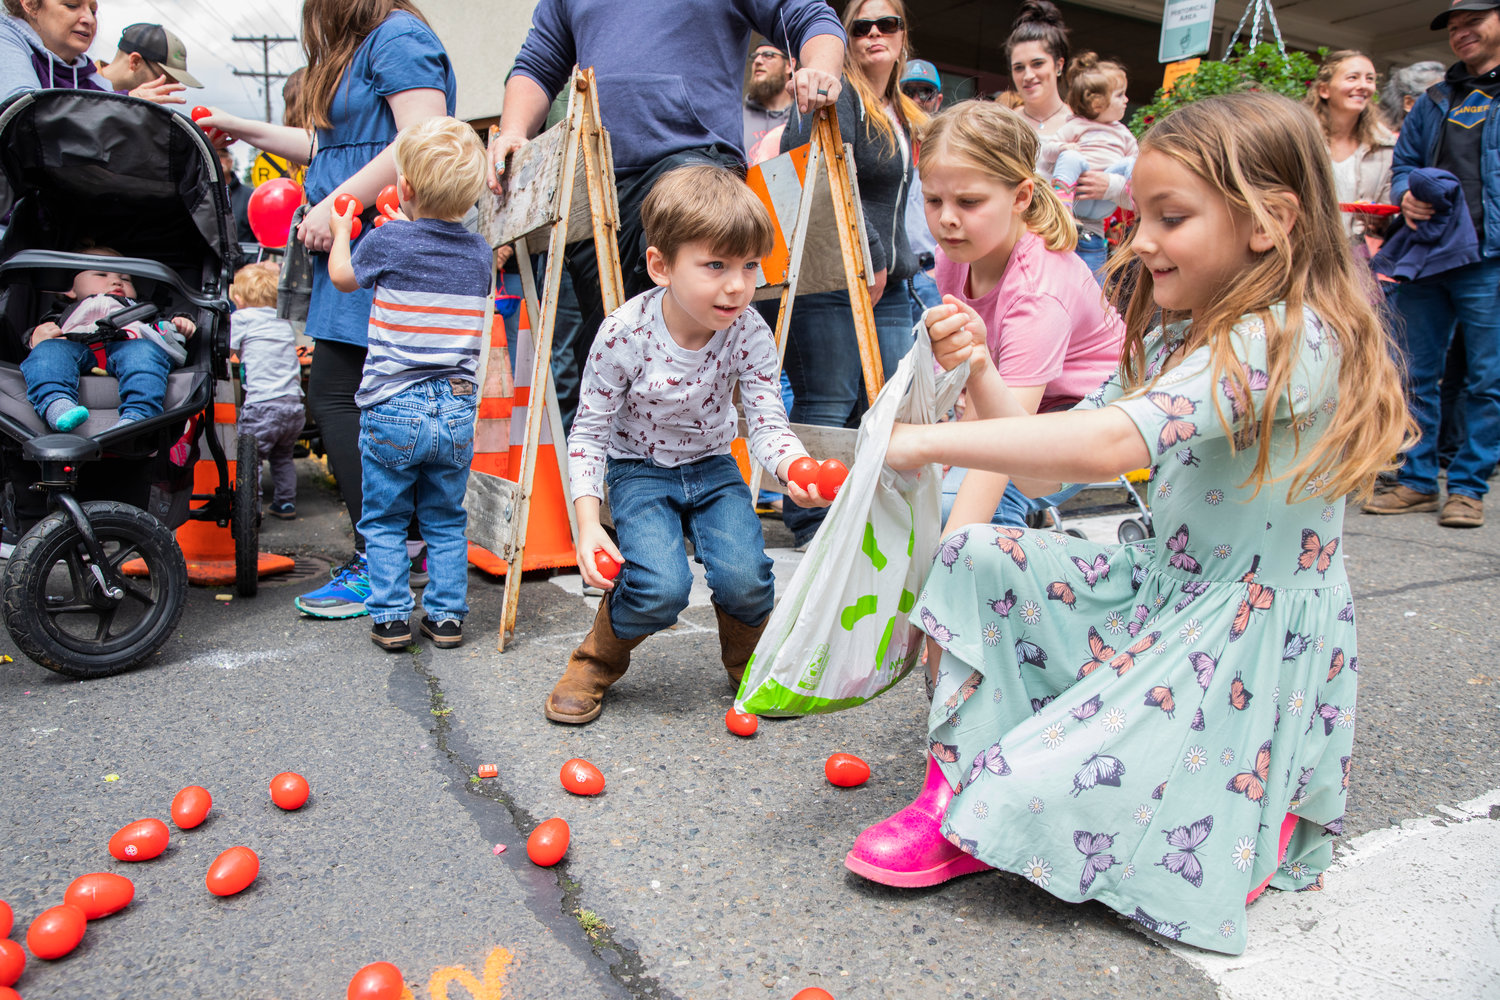 Kids stuff bags with plastic eggs full of candy during the Egg Days Festival parade in Winlock on Saturday.